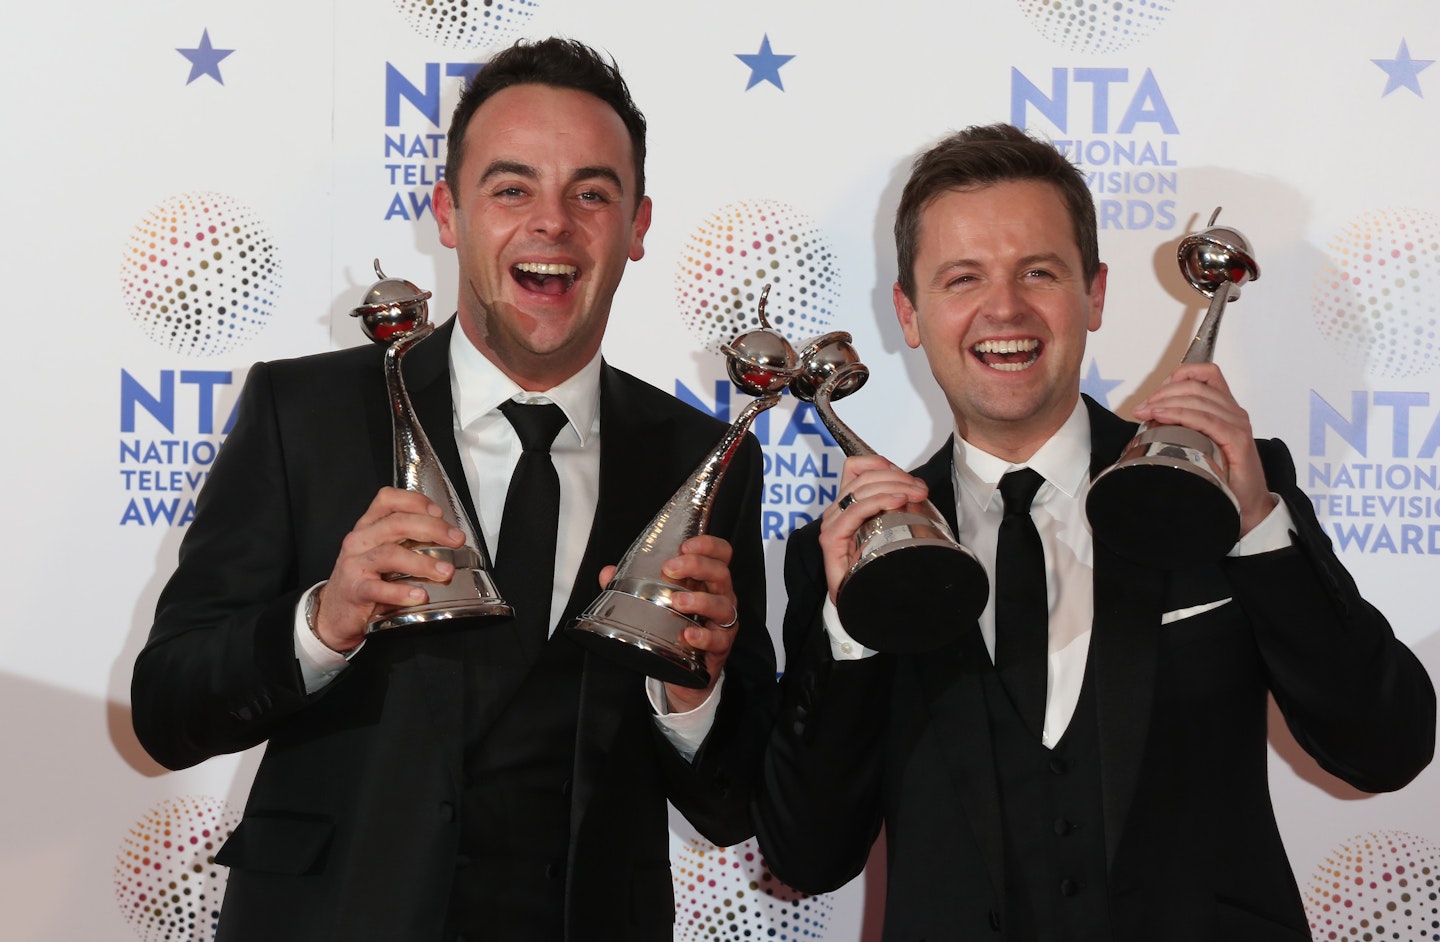 Ant and Dec showing off their awards at last year's NTAs